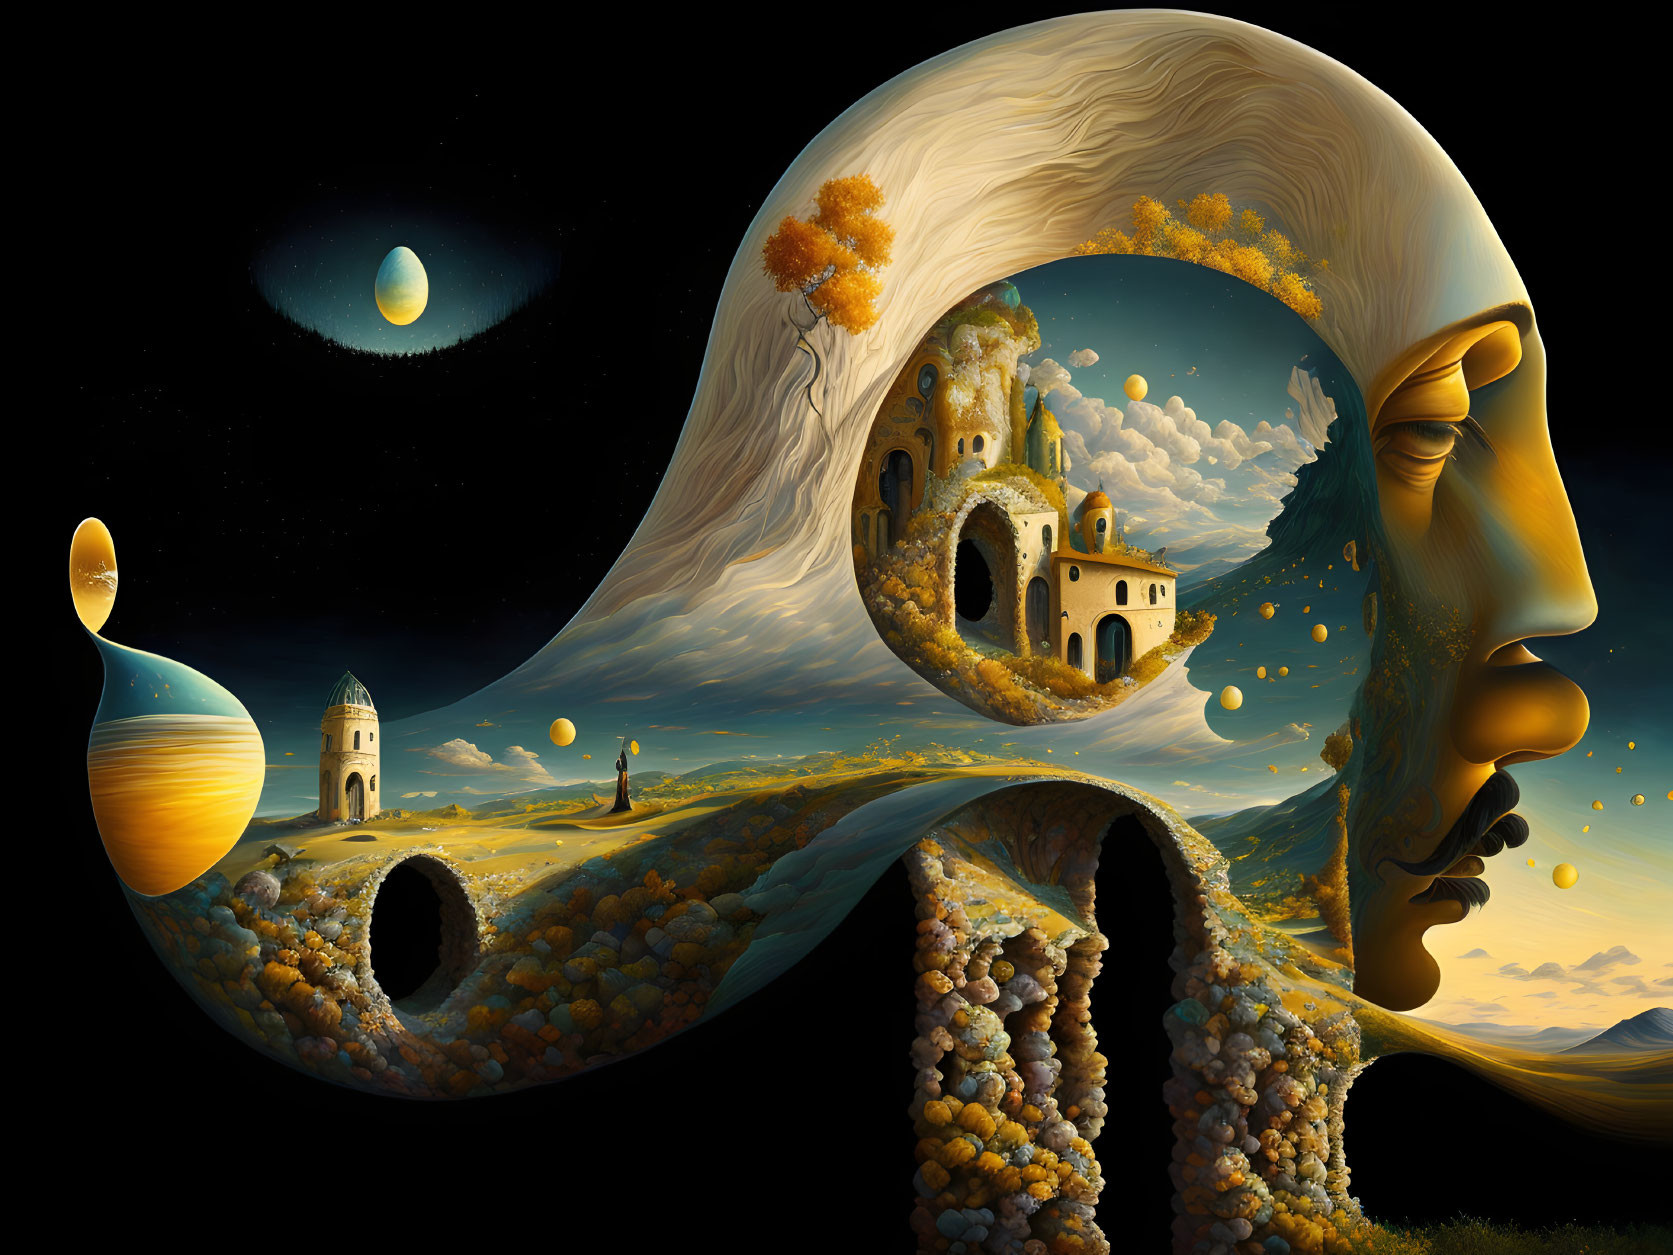 Surreal artwork: face silhouette, architectural landscape, floating orbs, starry sky